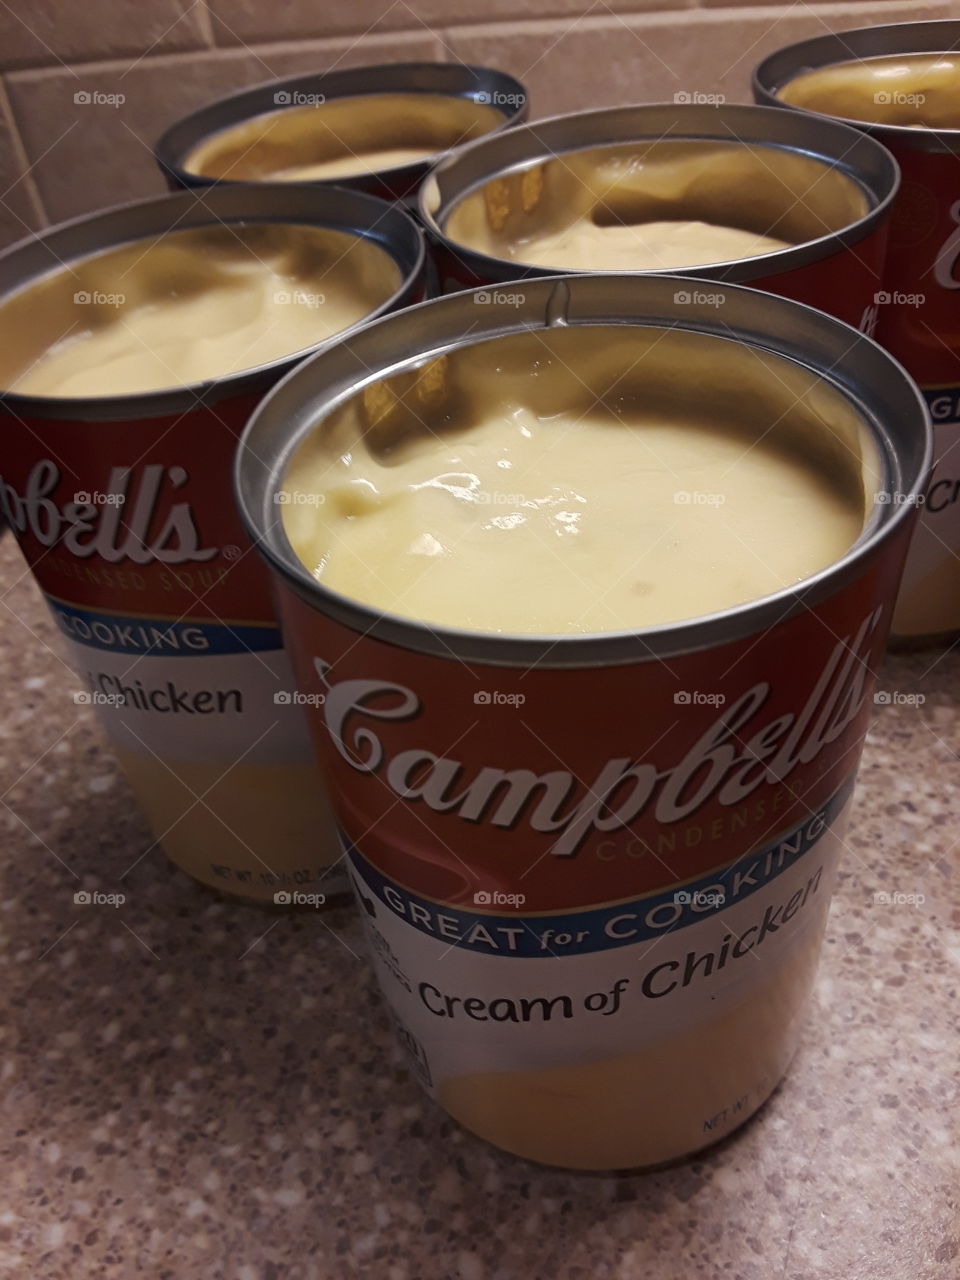 Campbell's Cream Of Chicken Soup Cans